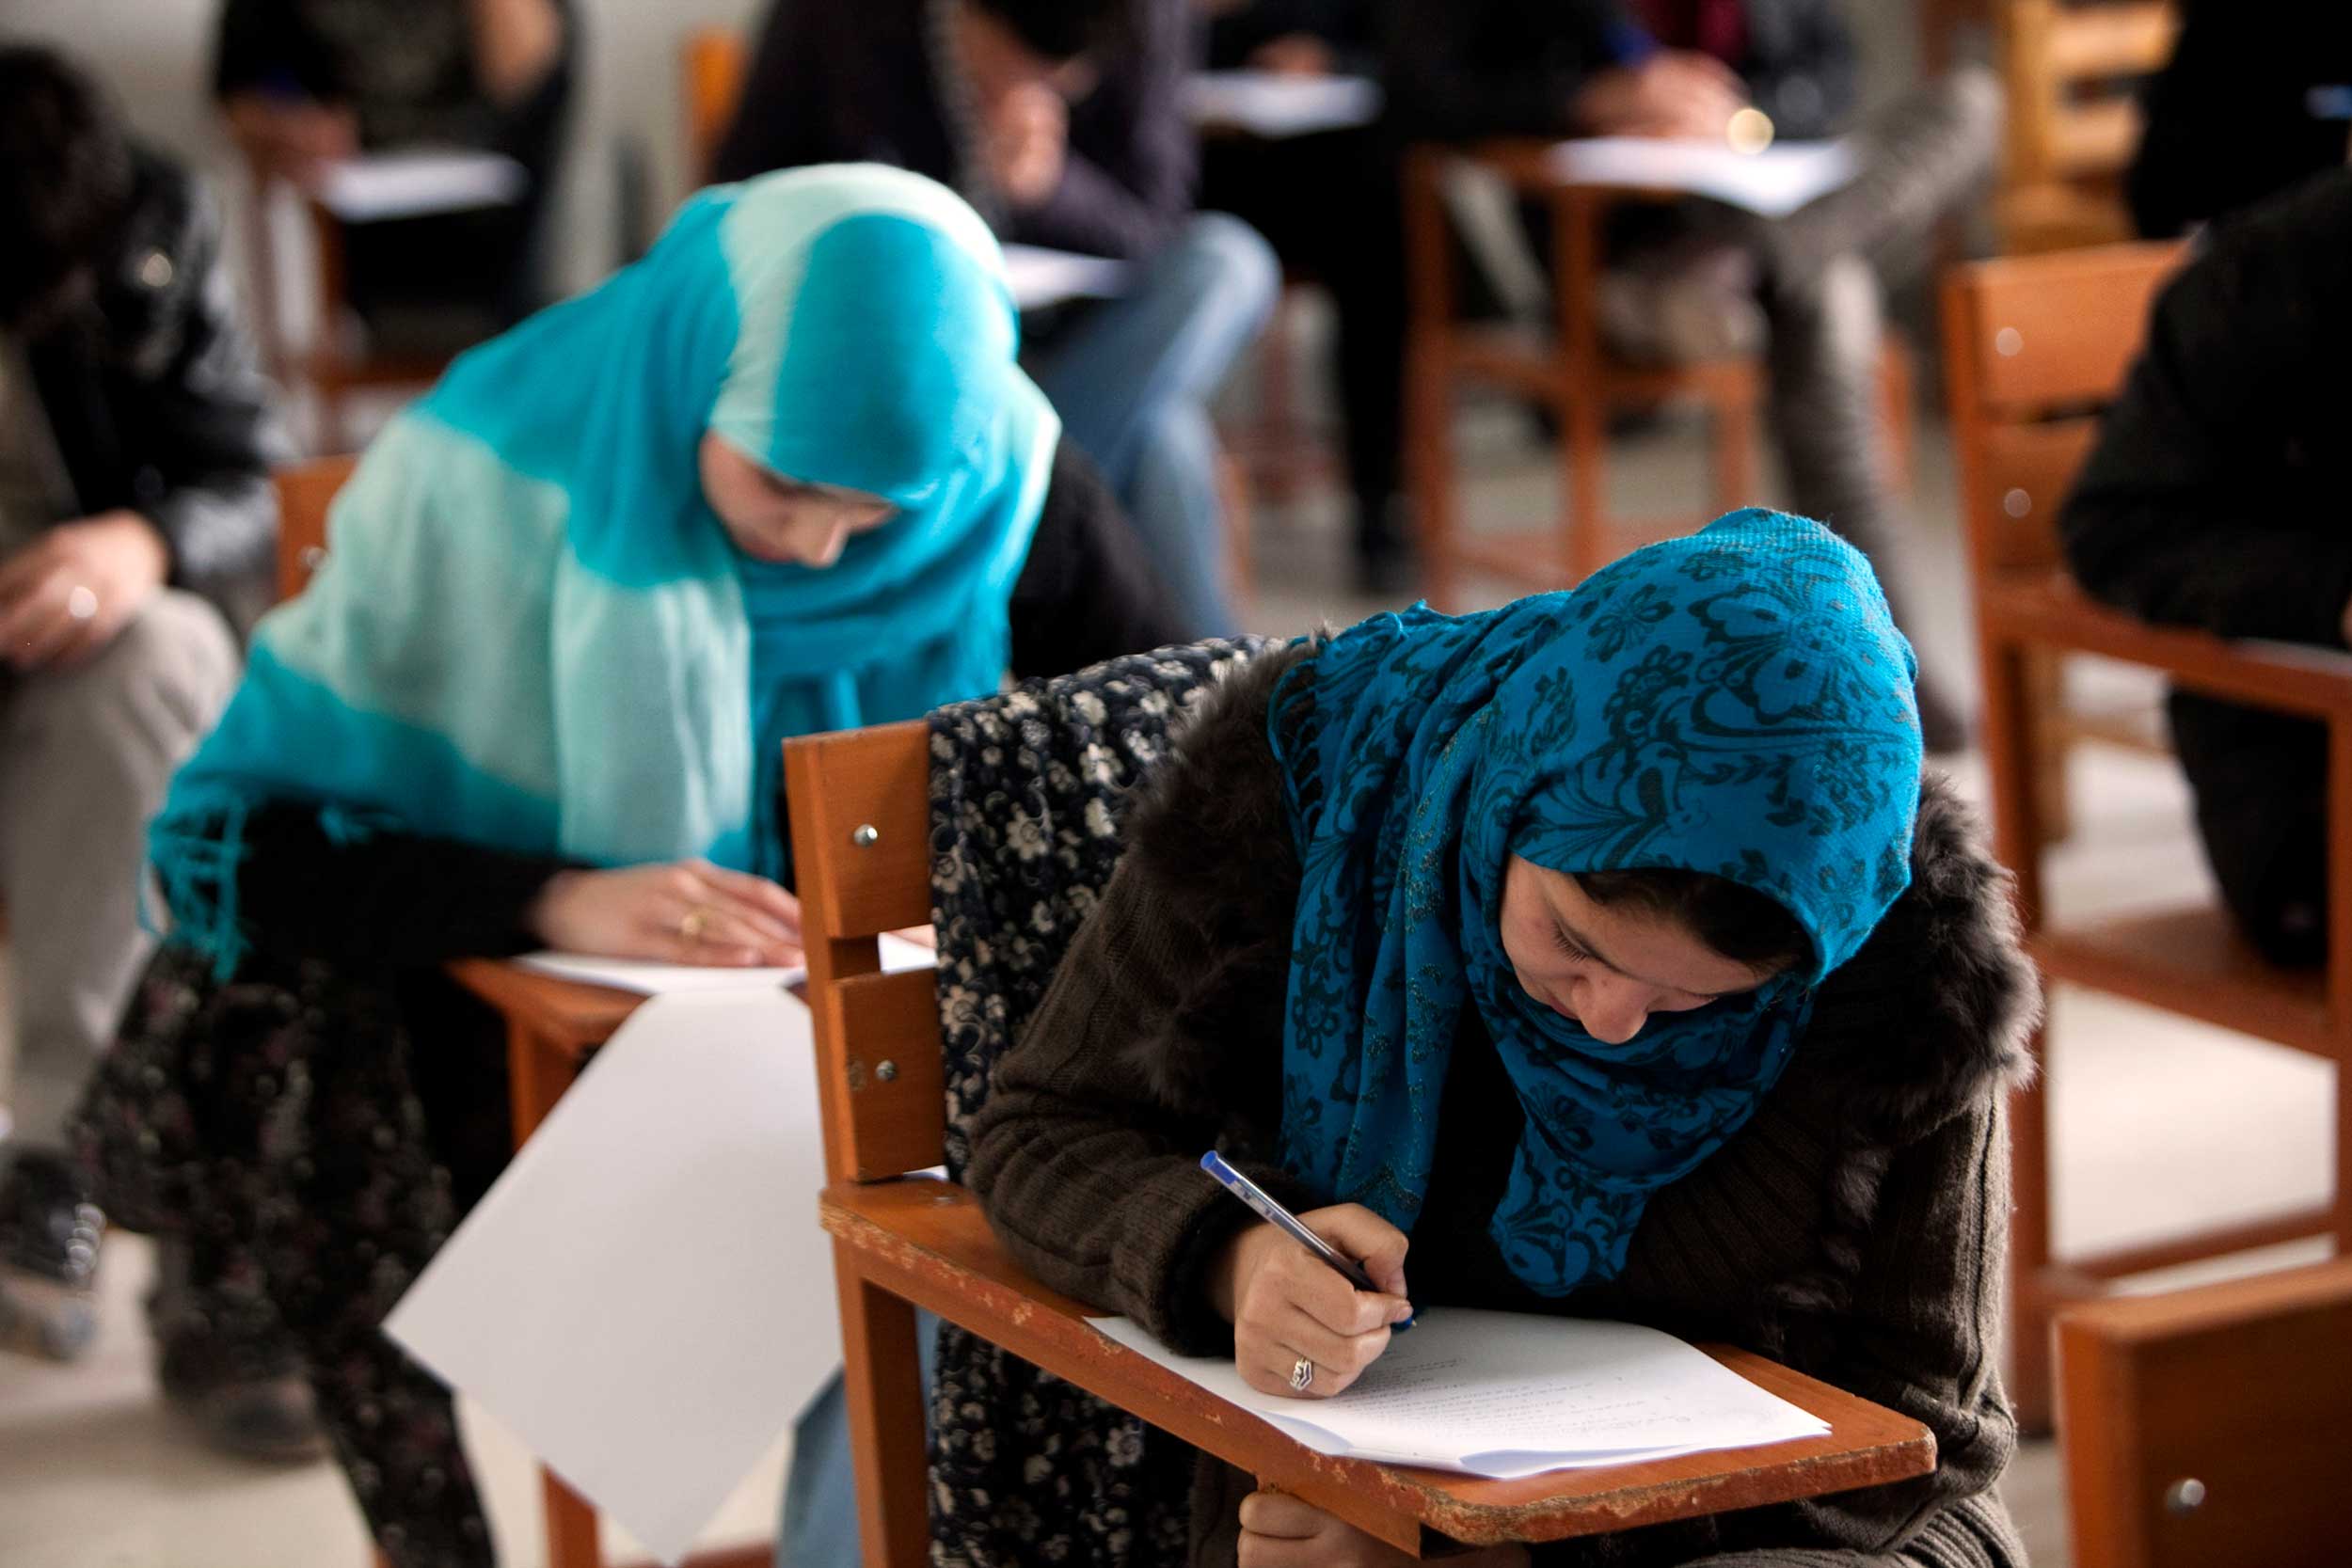 Photograph from 2010 with Afghan female students attending a lecture at Kabul University. Since the Taleban returned to power women had to quit jobs and young girls after the age of 12 can no longer go to school or complete further education. © Majid Saeedi/Getty Images